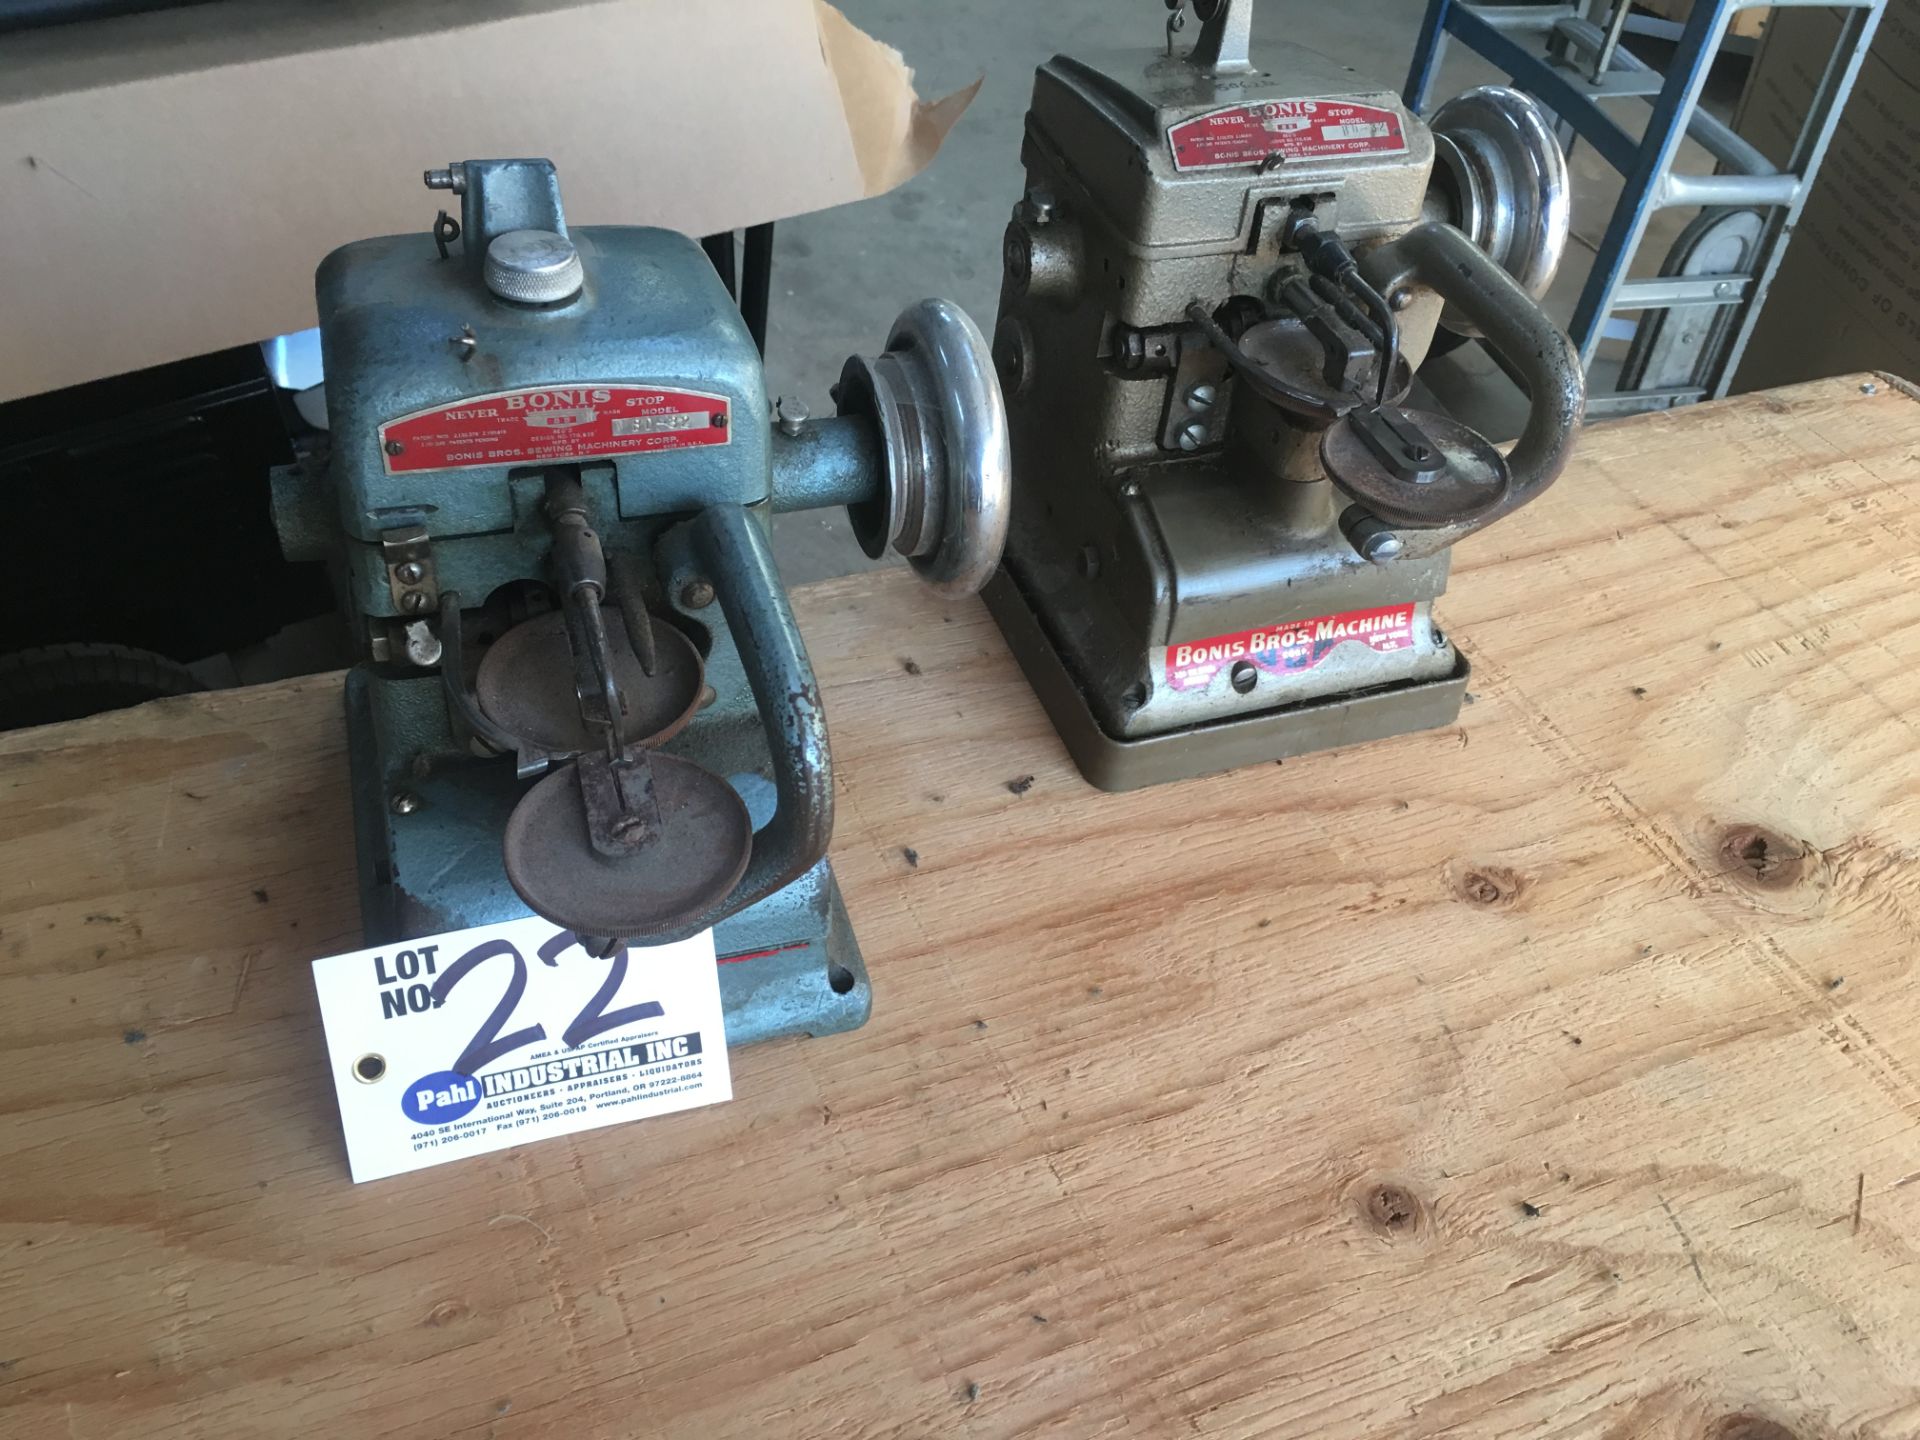 (2) Bonis BD-32 Fur Sewing machines (not known if operational)